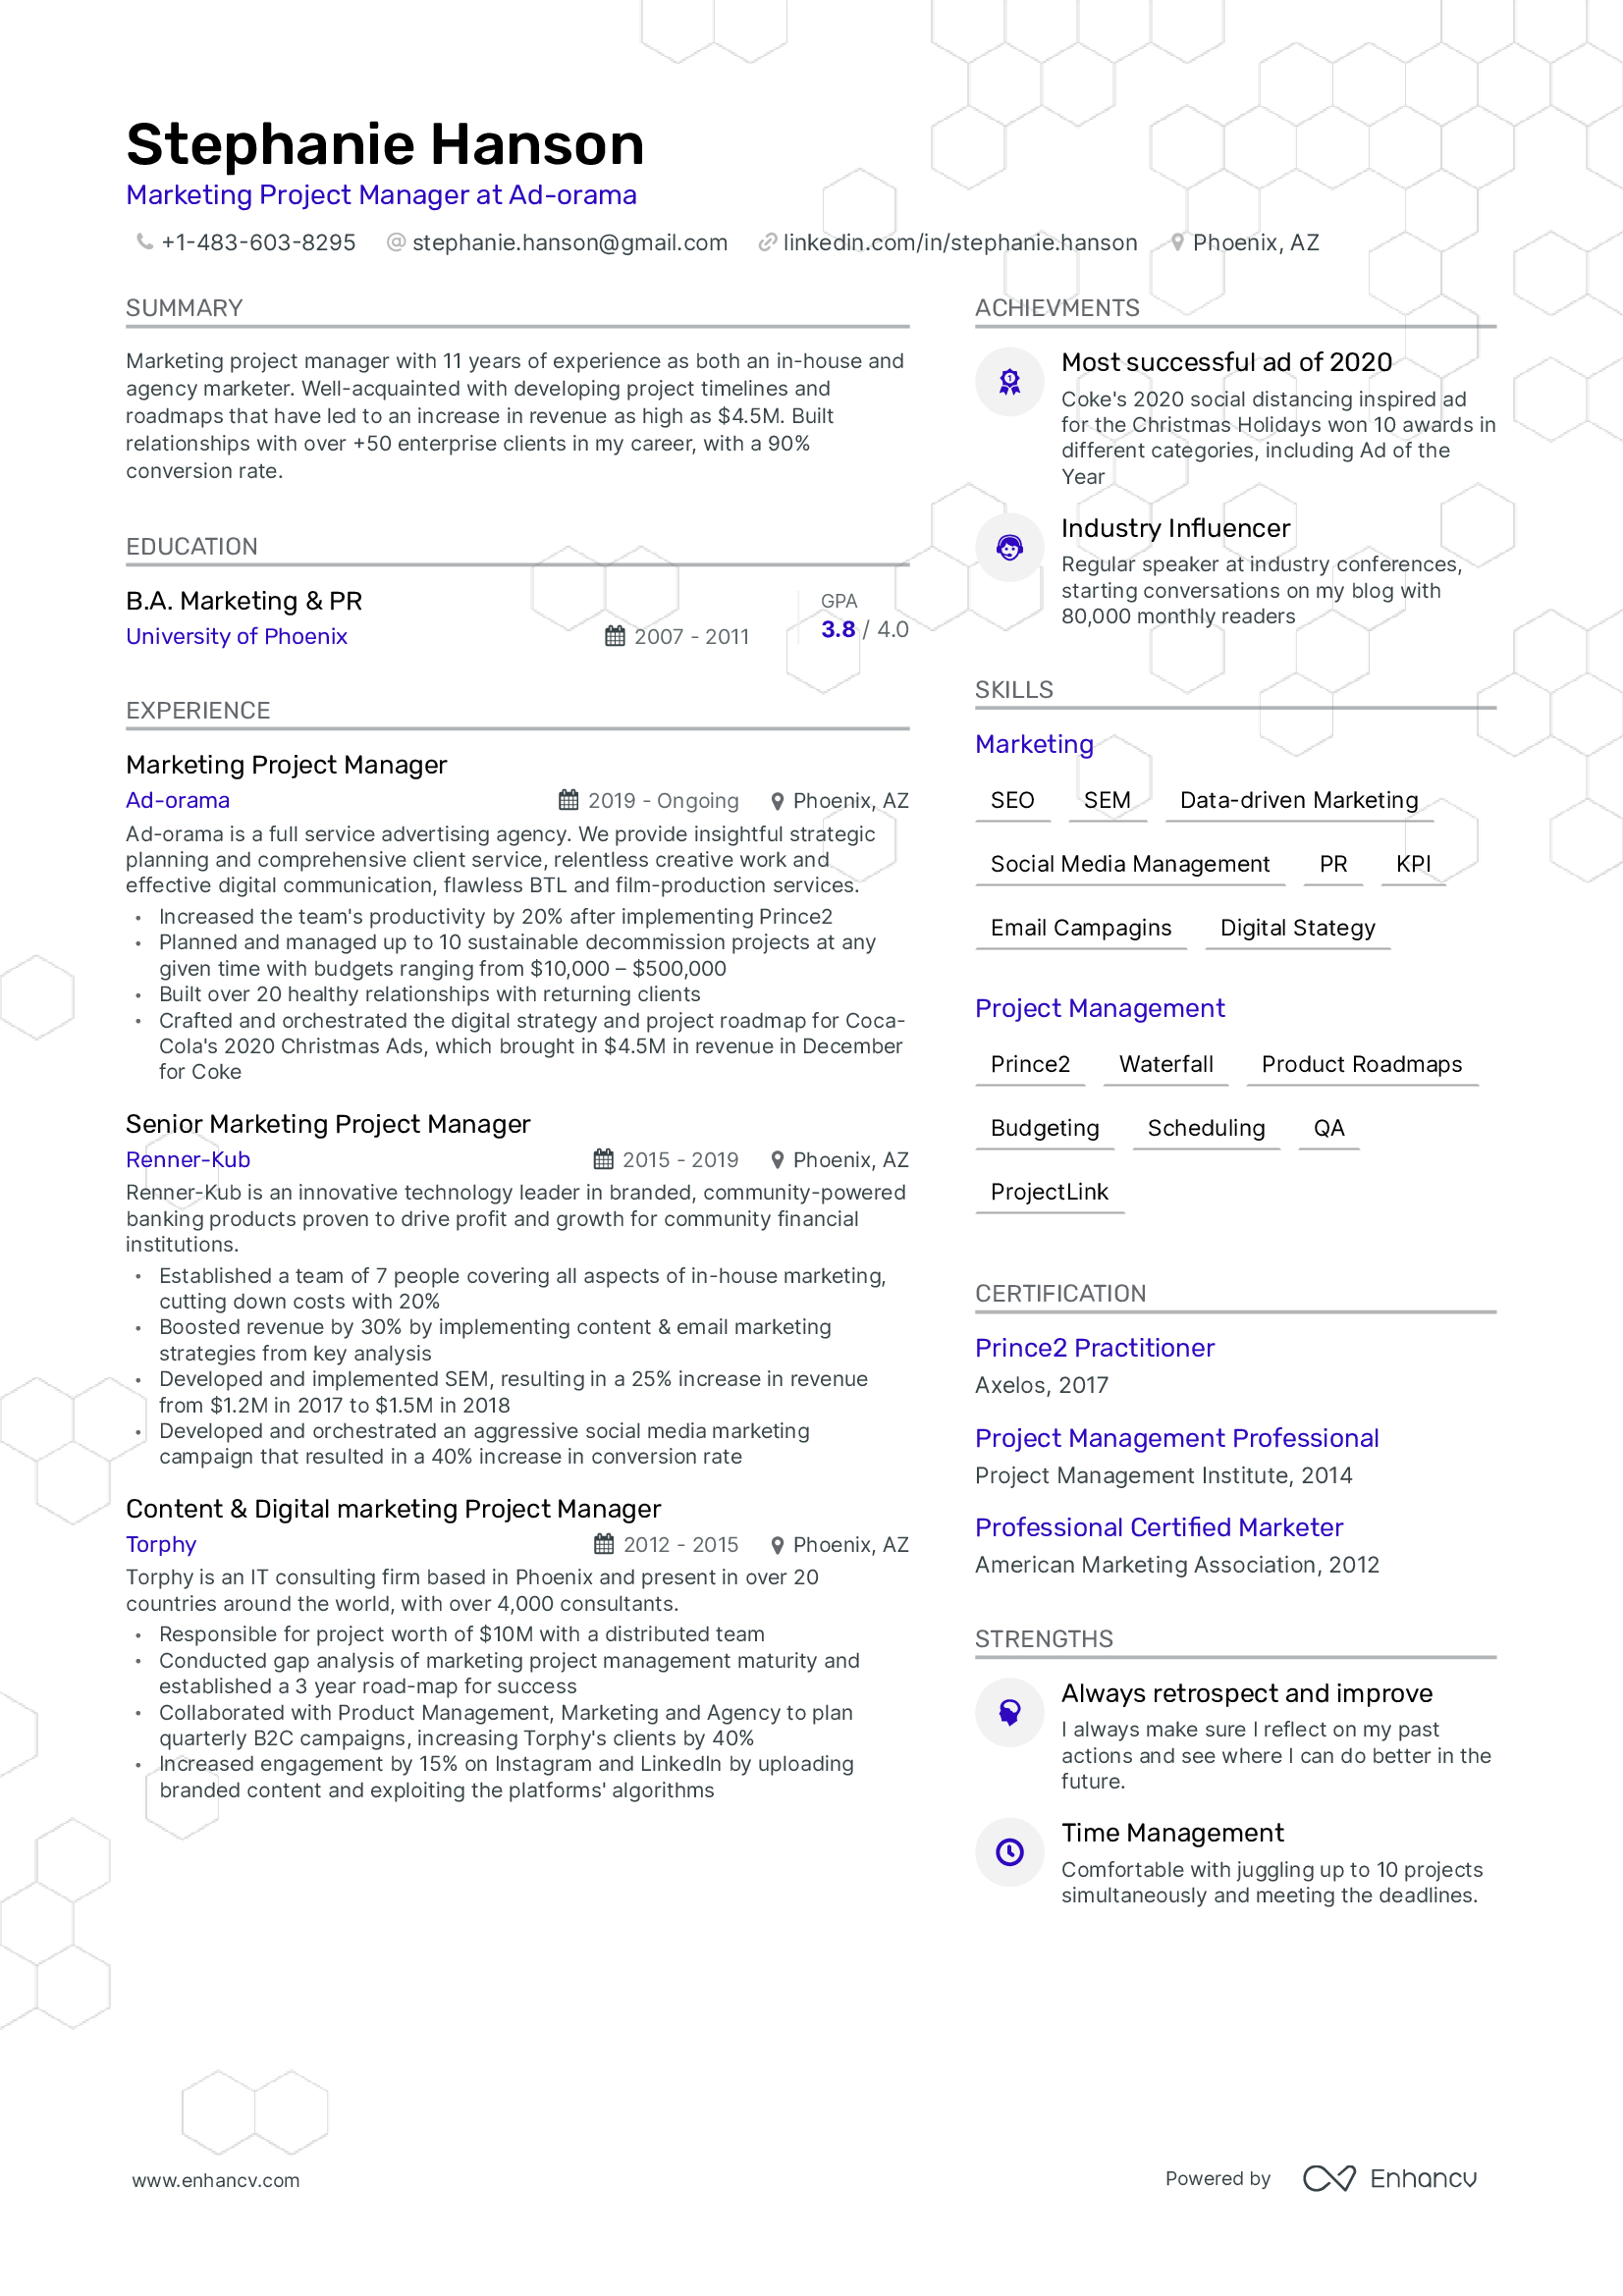 Markerting Project Manager Resume Example.png